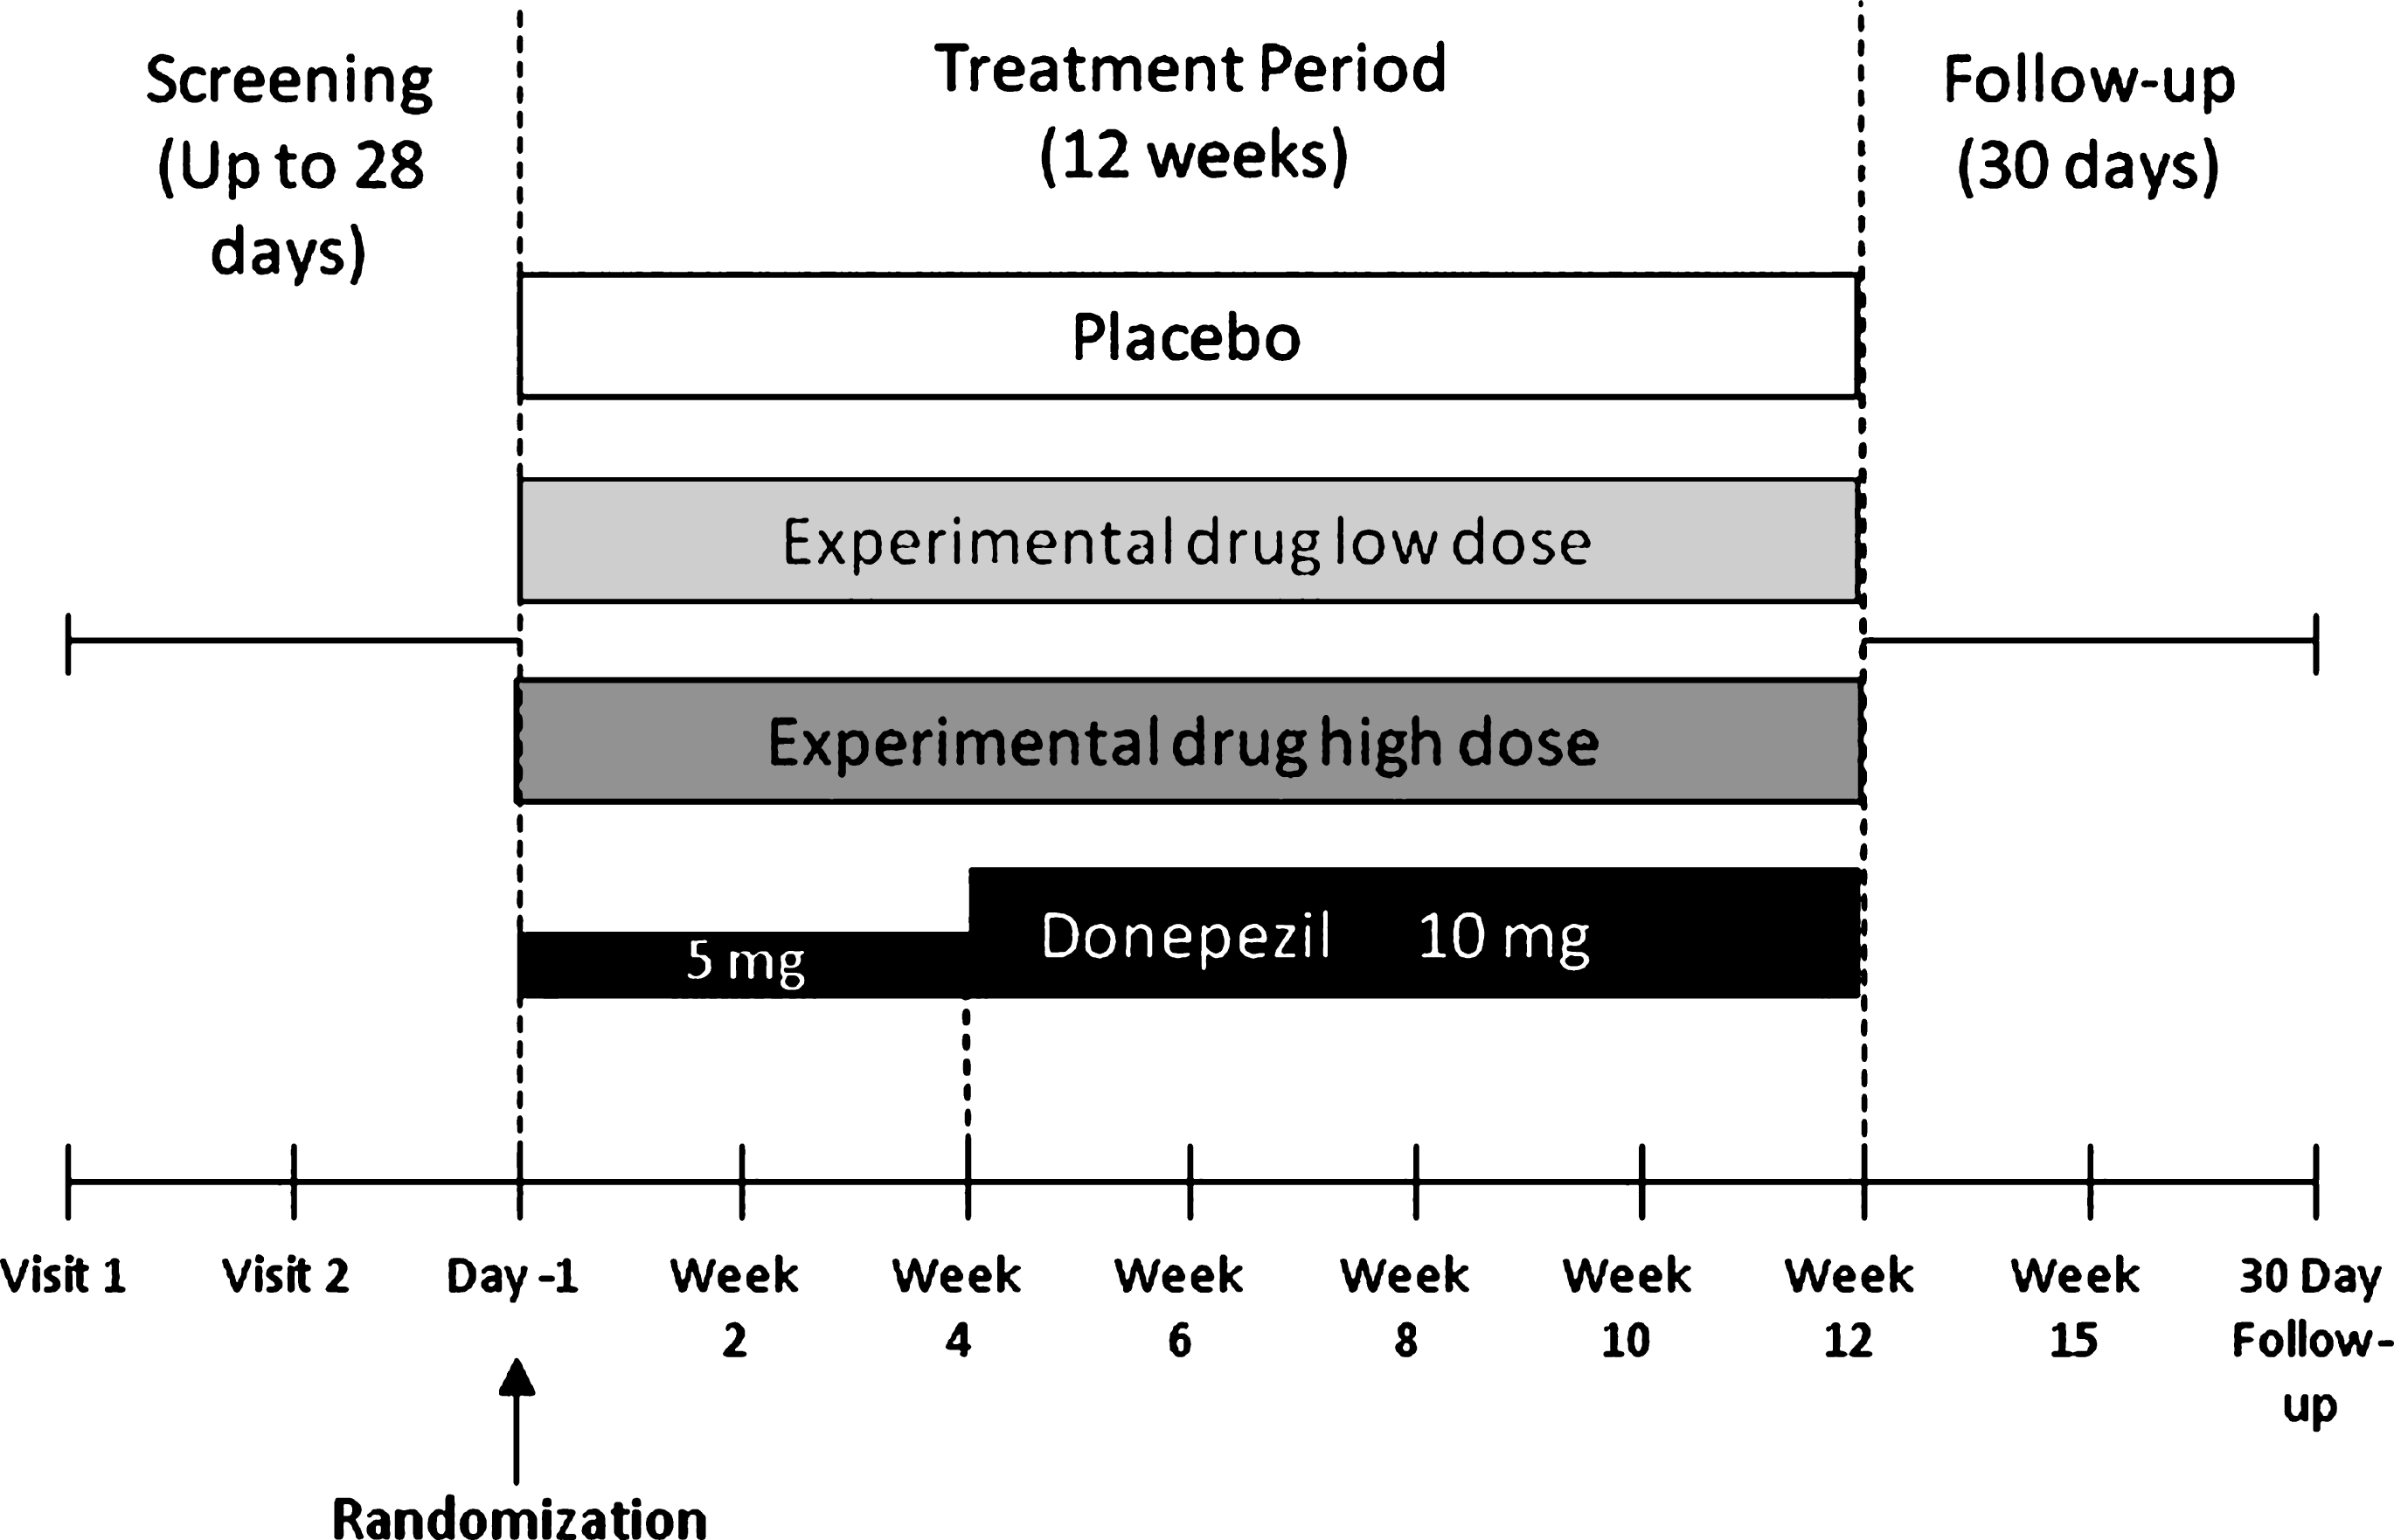 Study schematic showing design shared among the three studies that contributed to the dataset. Only patients treated with placebo or donepezil were included in the analyses.